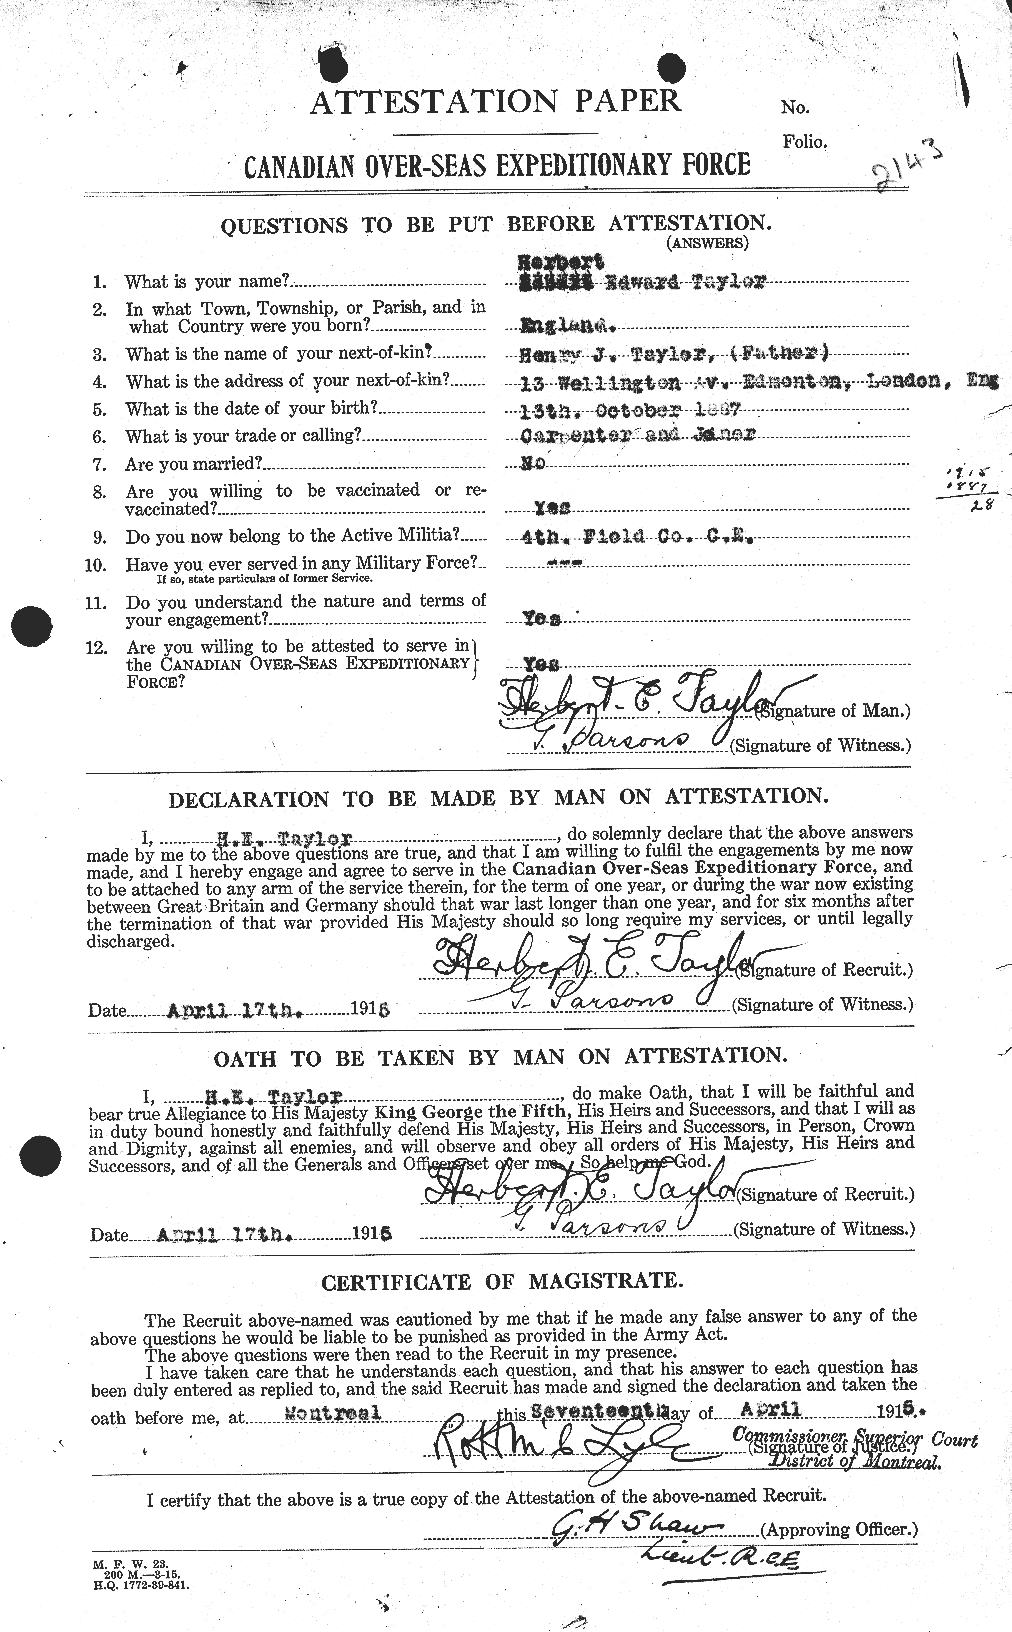 Personnel Records of the First World War - CEF 626566a